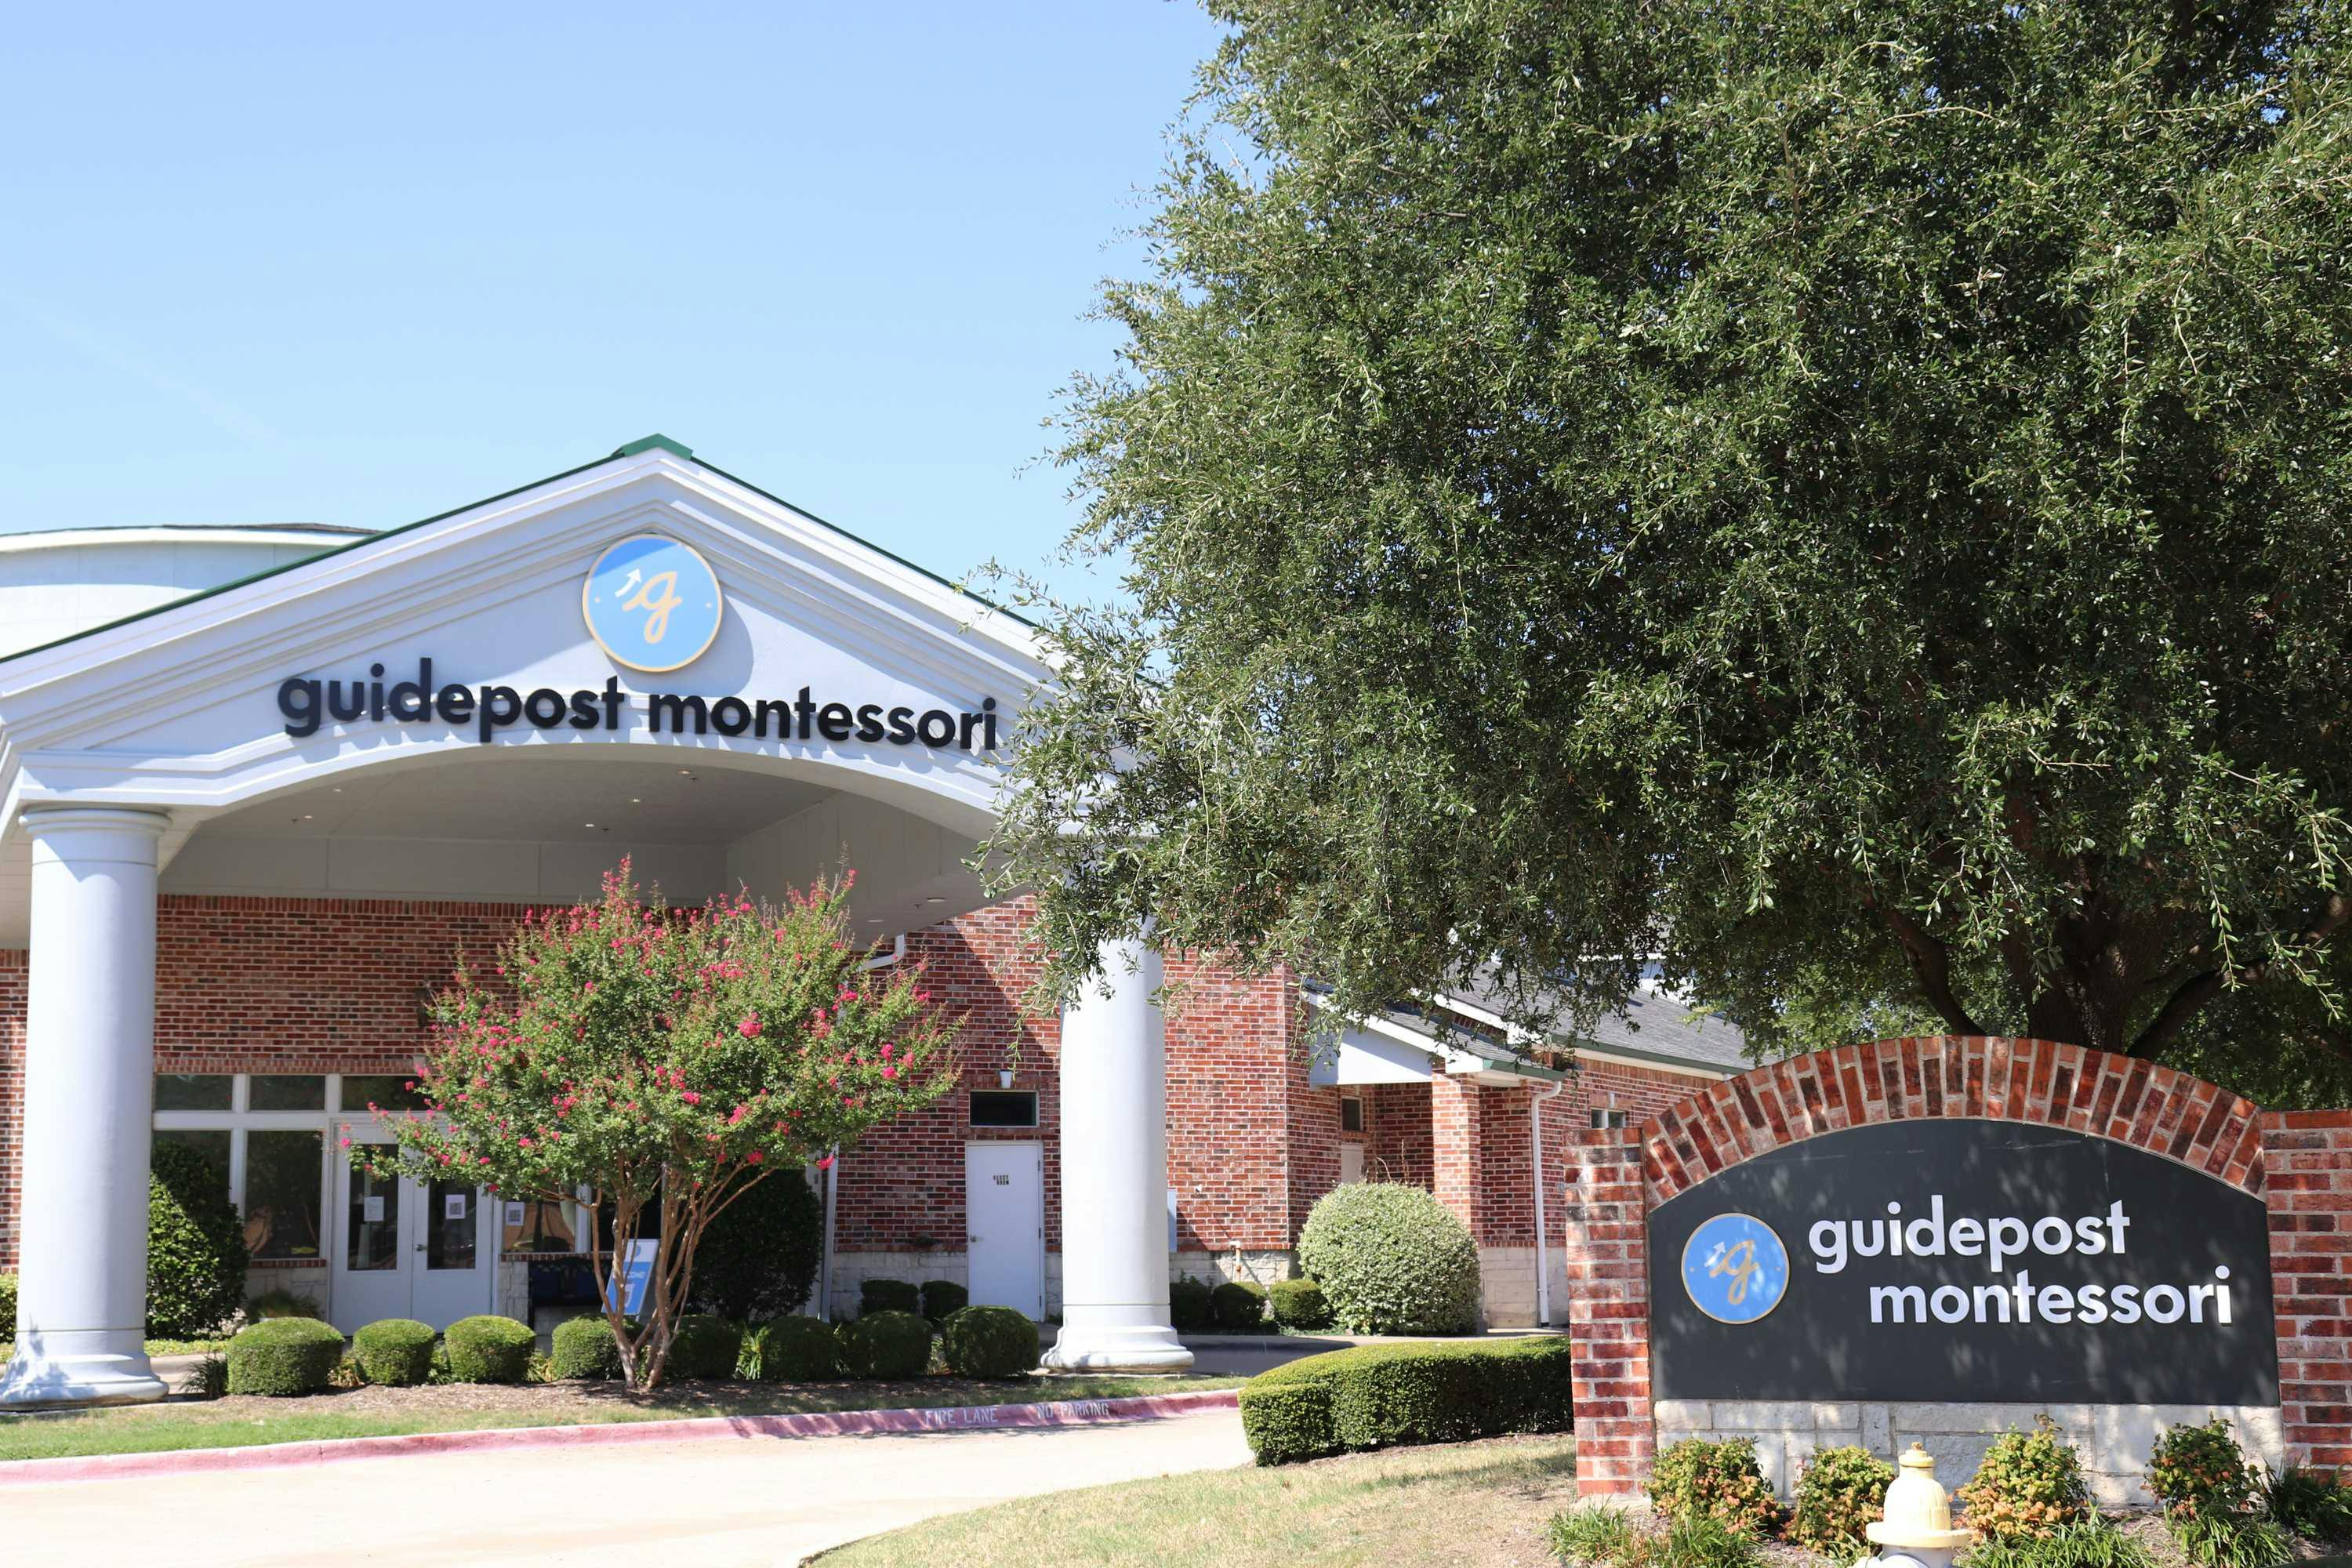 View of Guidepost Montessori at Stonebriar that shows the floral walkway, lined with bushes and blossoming trees, flanked by two large white pillars. Two branded Guidepost Montessori signs can be seen.